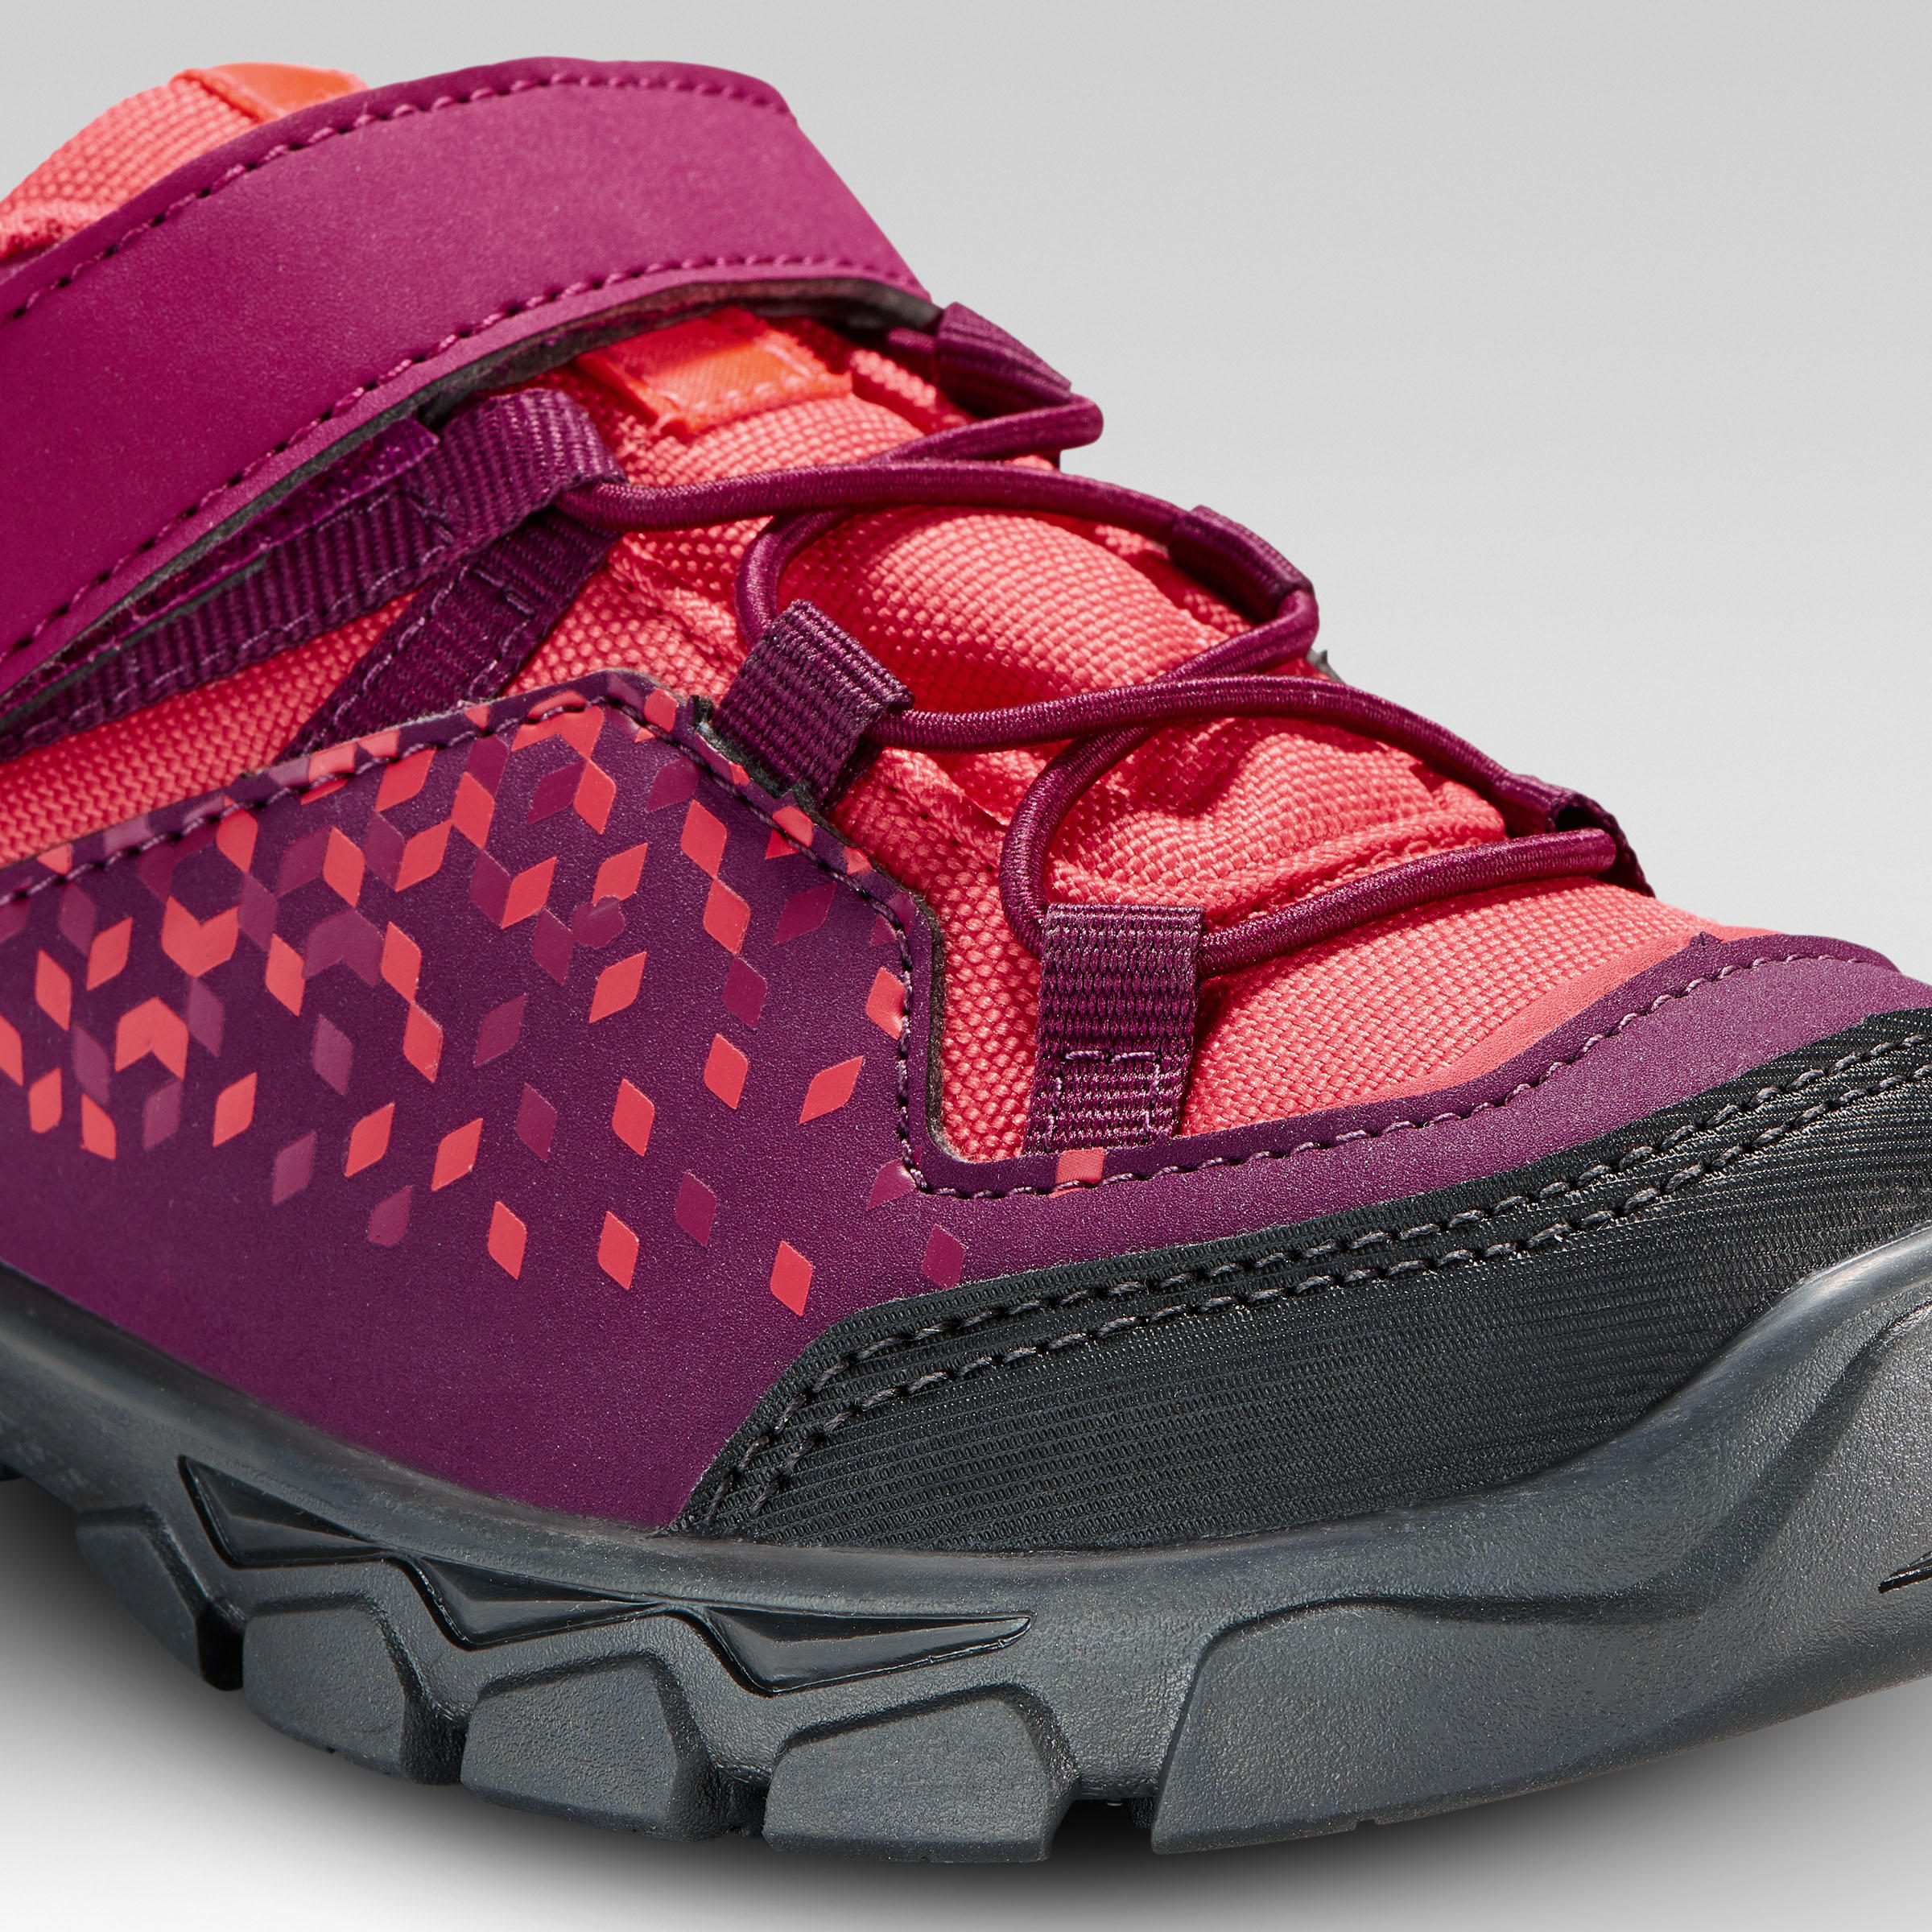 Kids' Velcro Hiking Shoes MH120 LOW 28 to 34 - Purple 6/6